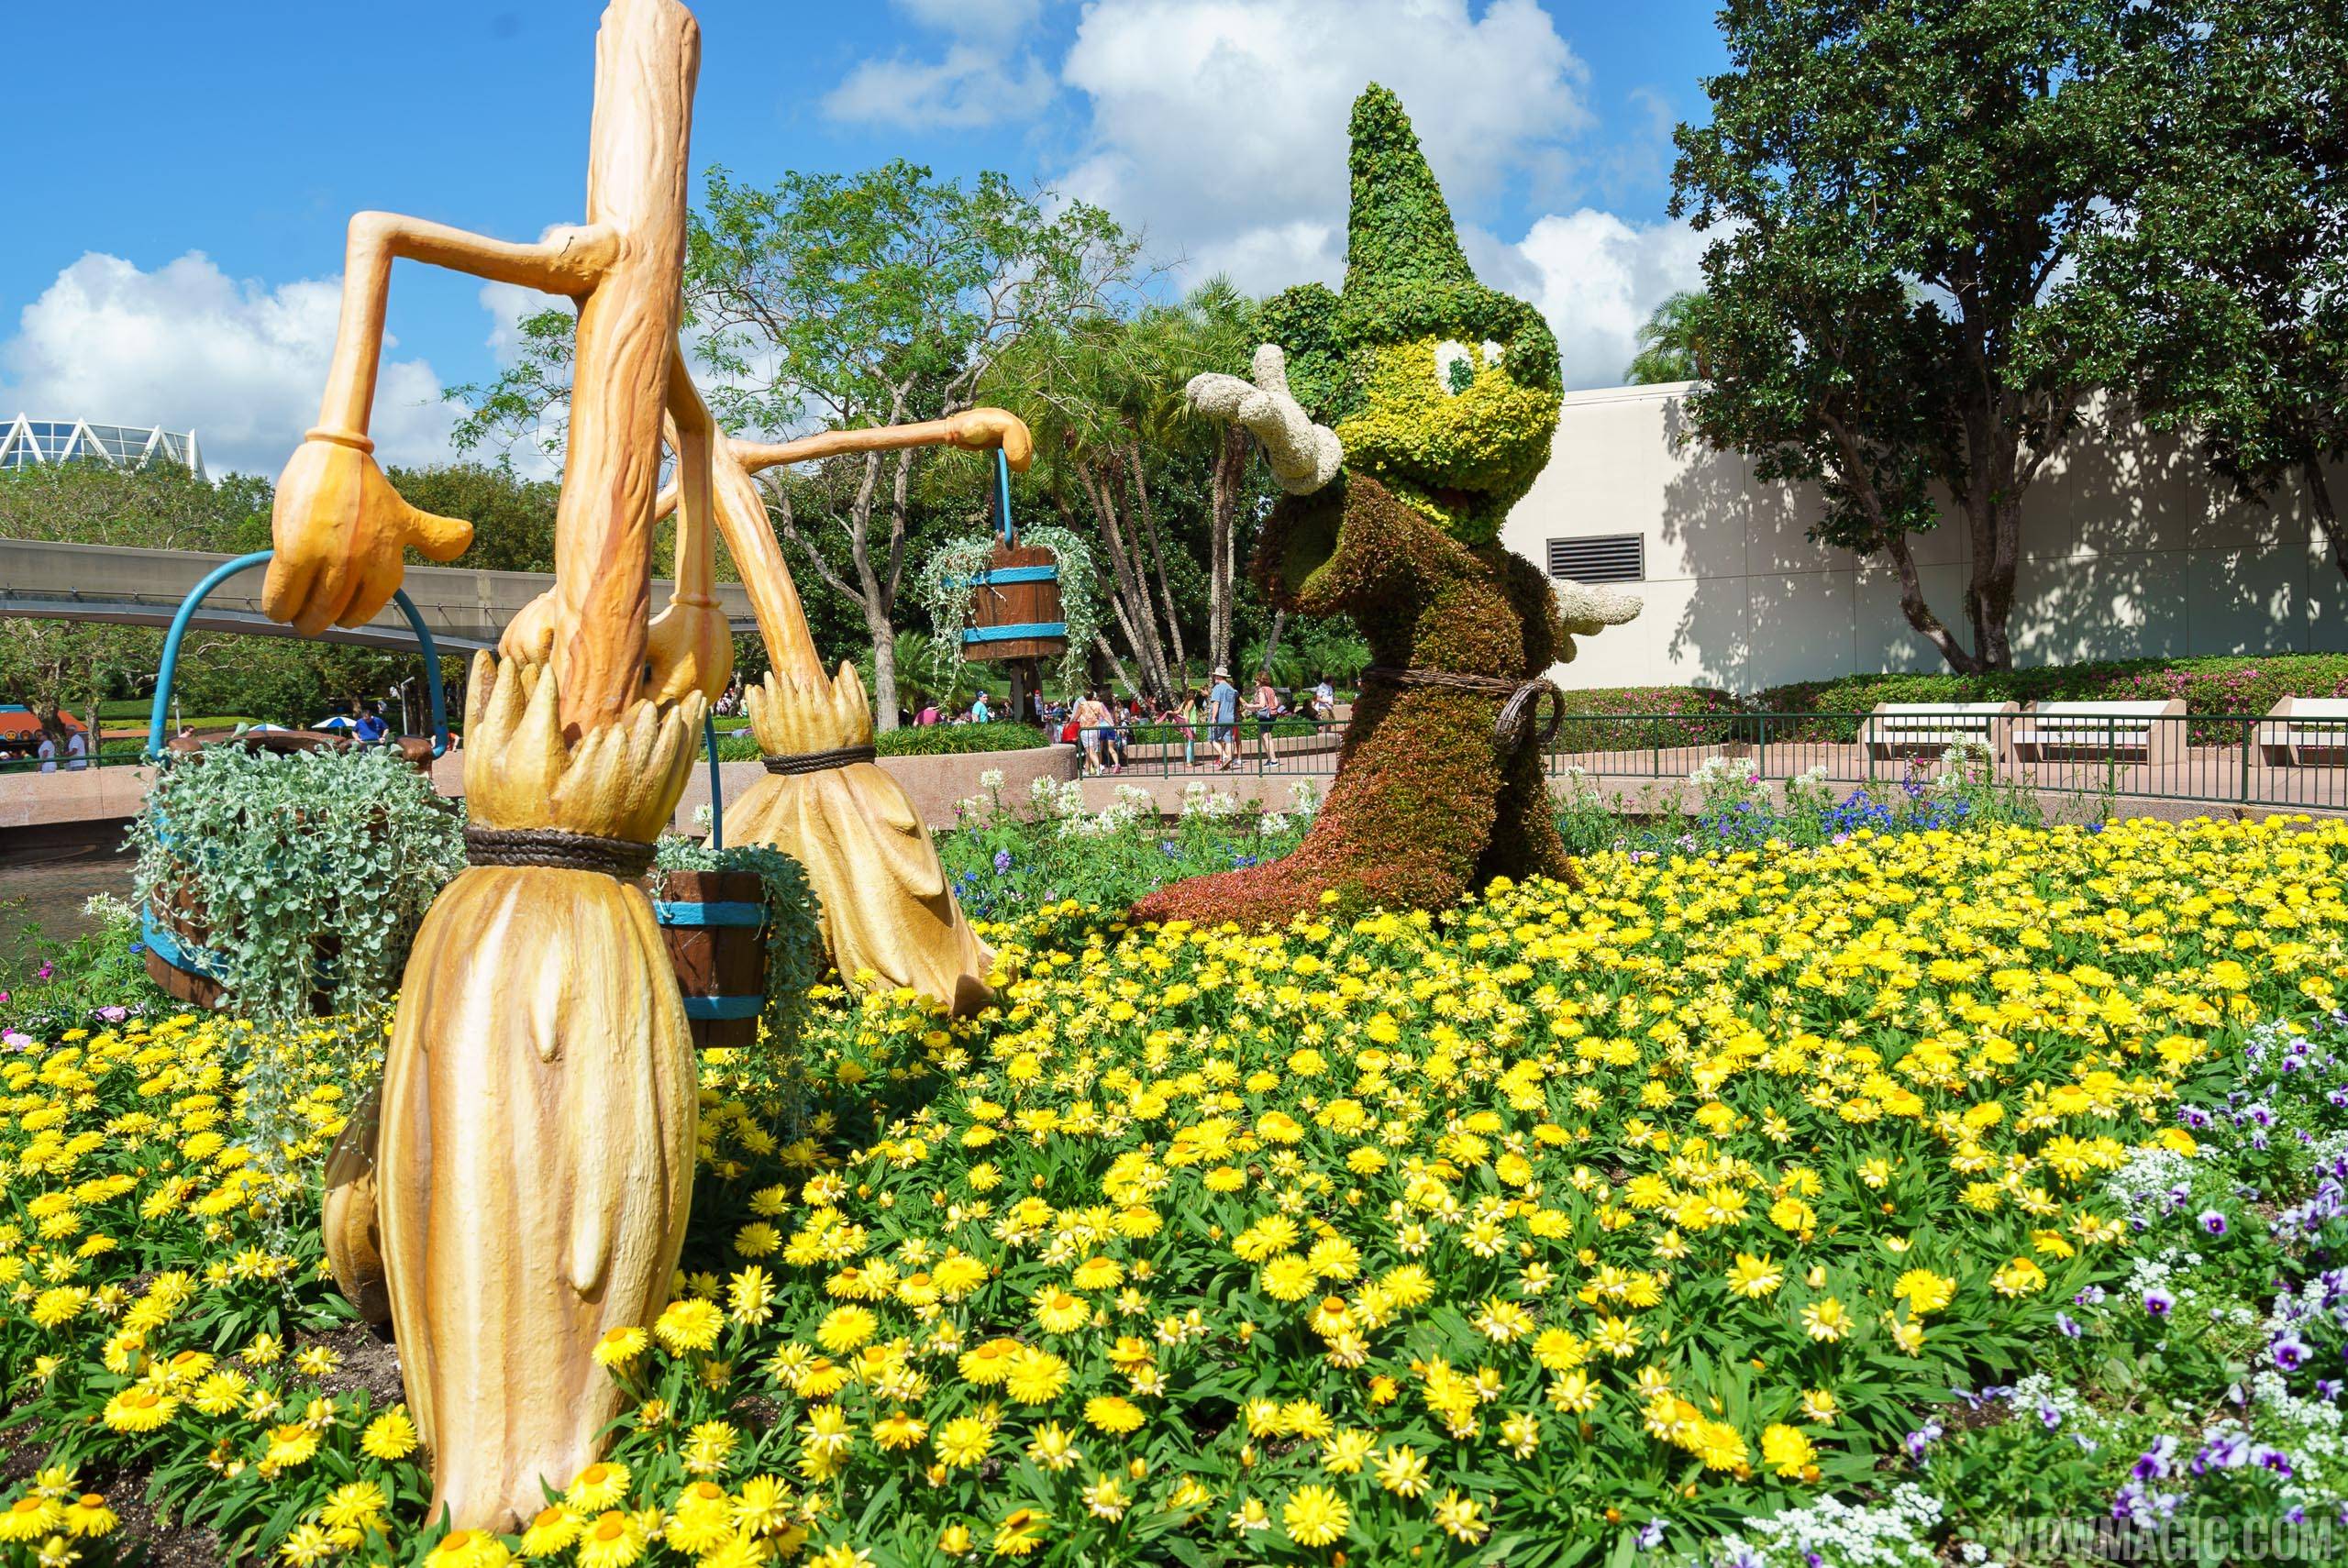 2017 Flower and Garden Festival - Fantasia topiaries in Future World West